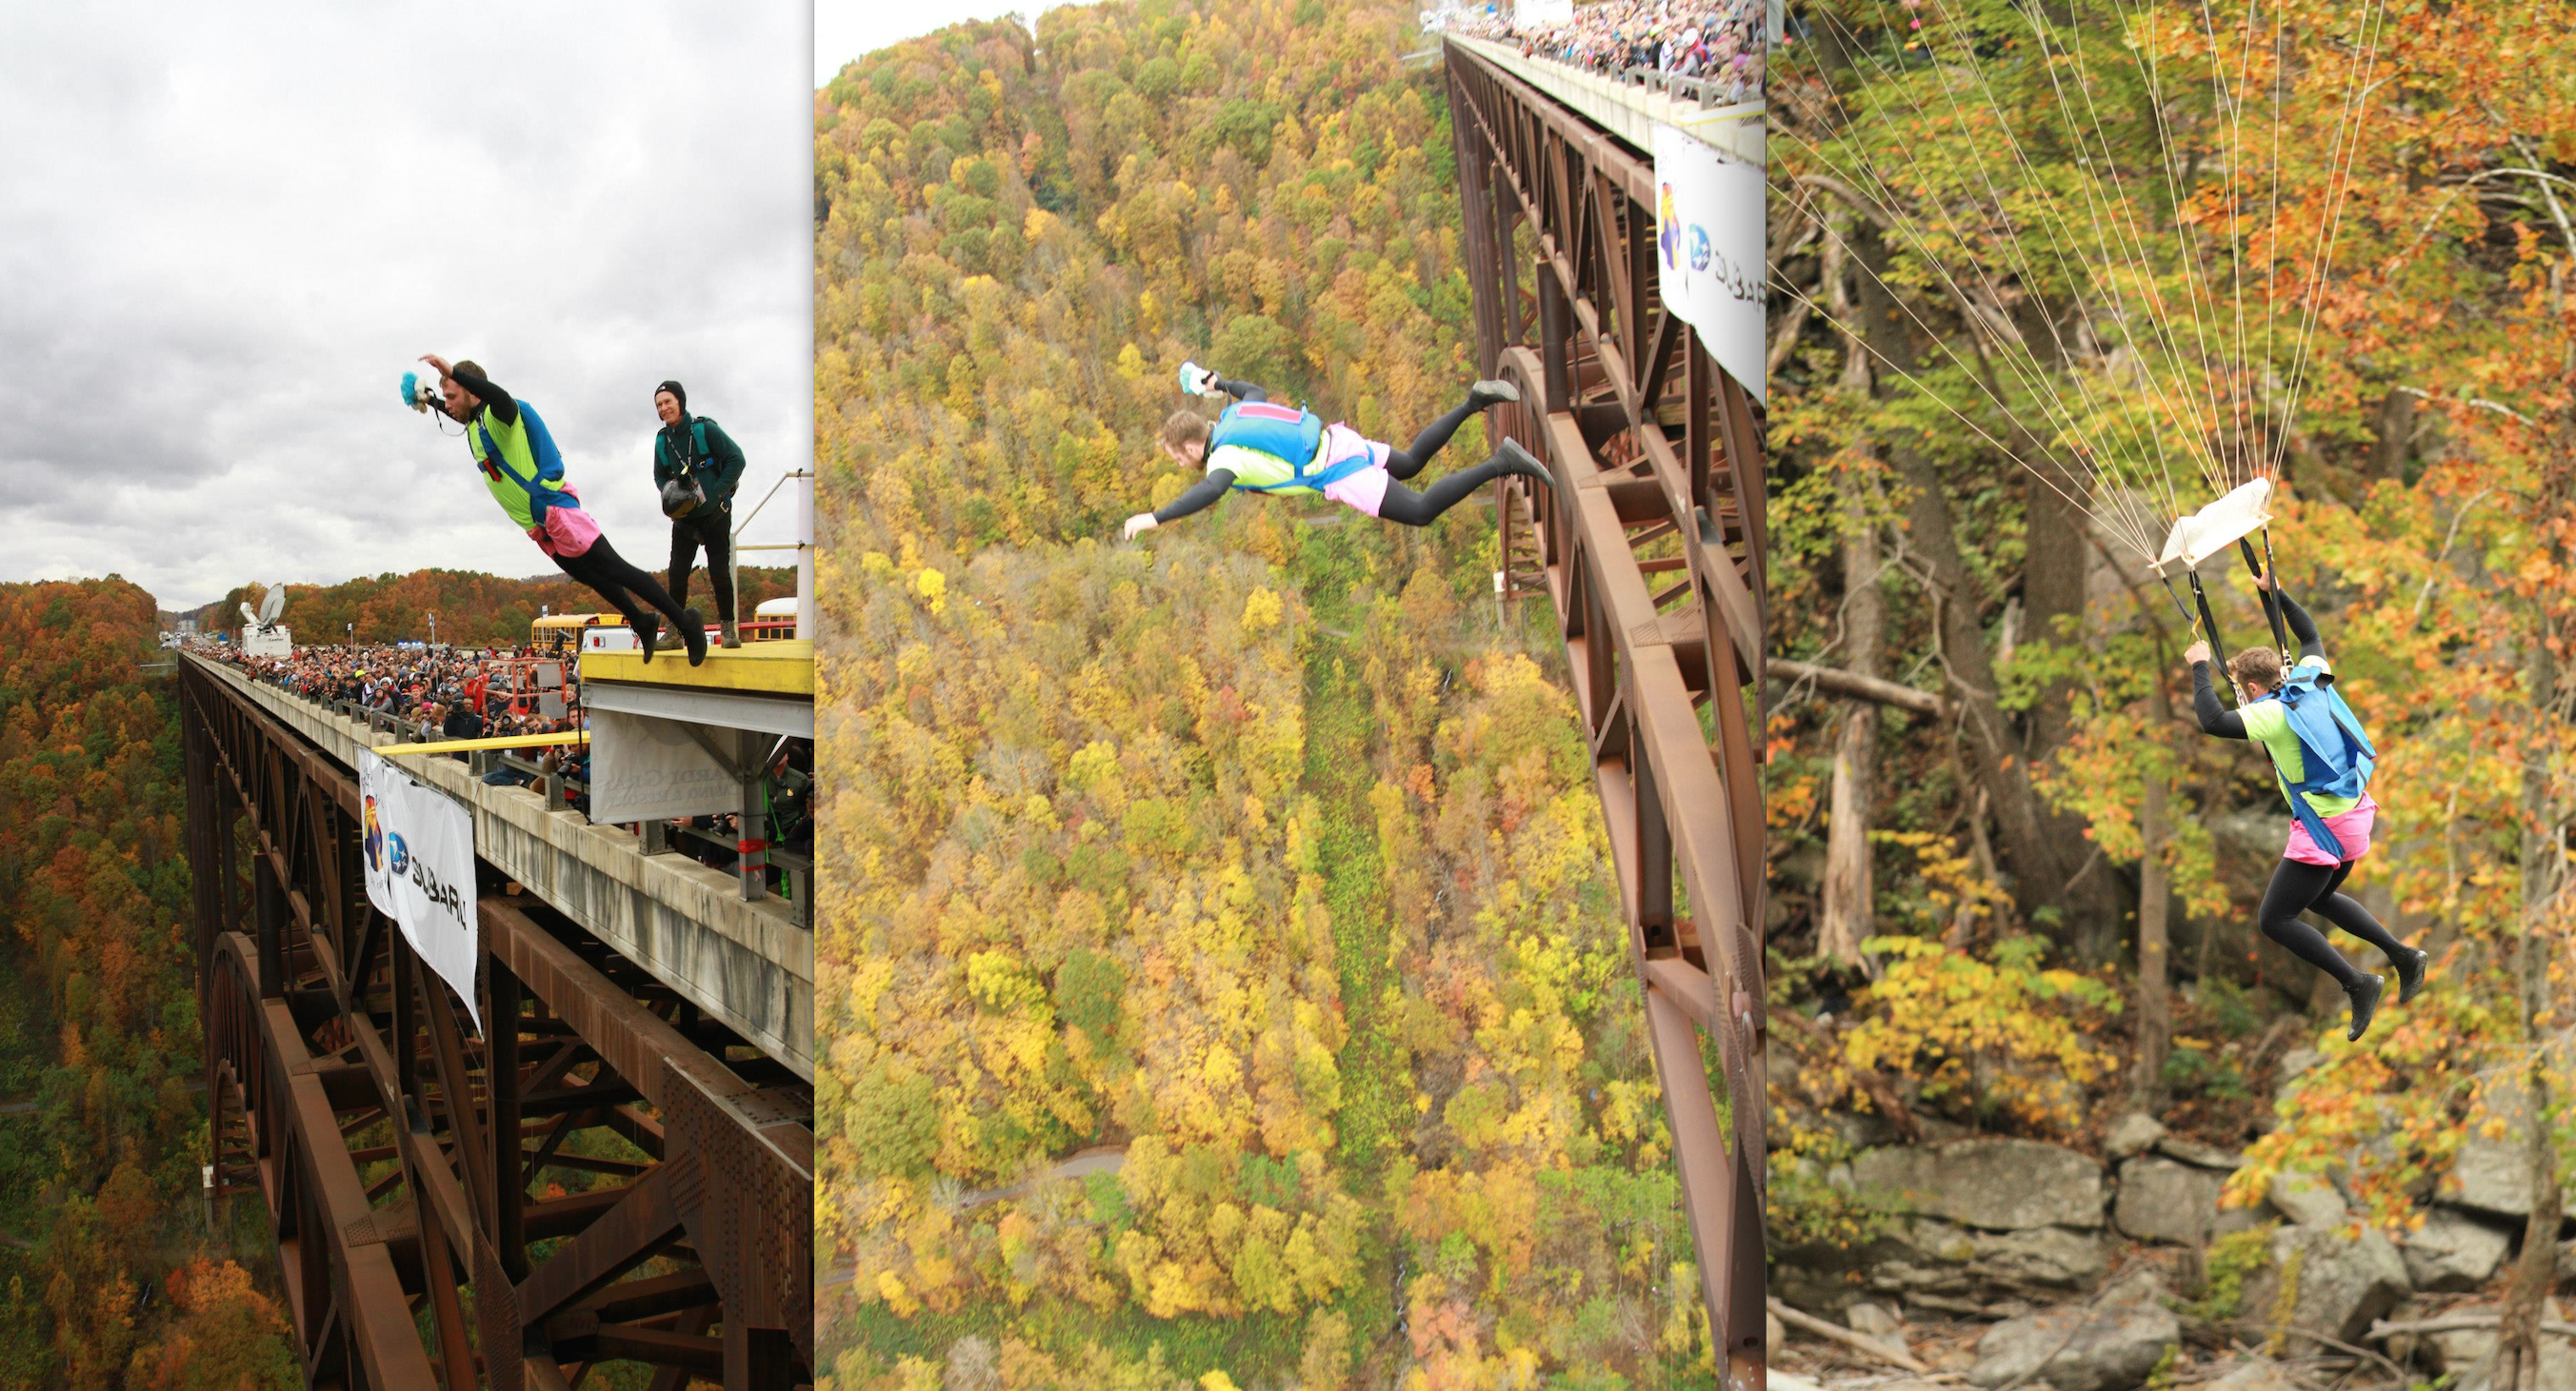 Taylor BASE jumps off the New River Gorge Bridge in 2012